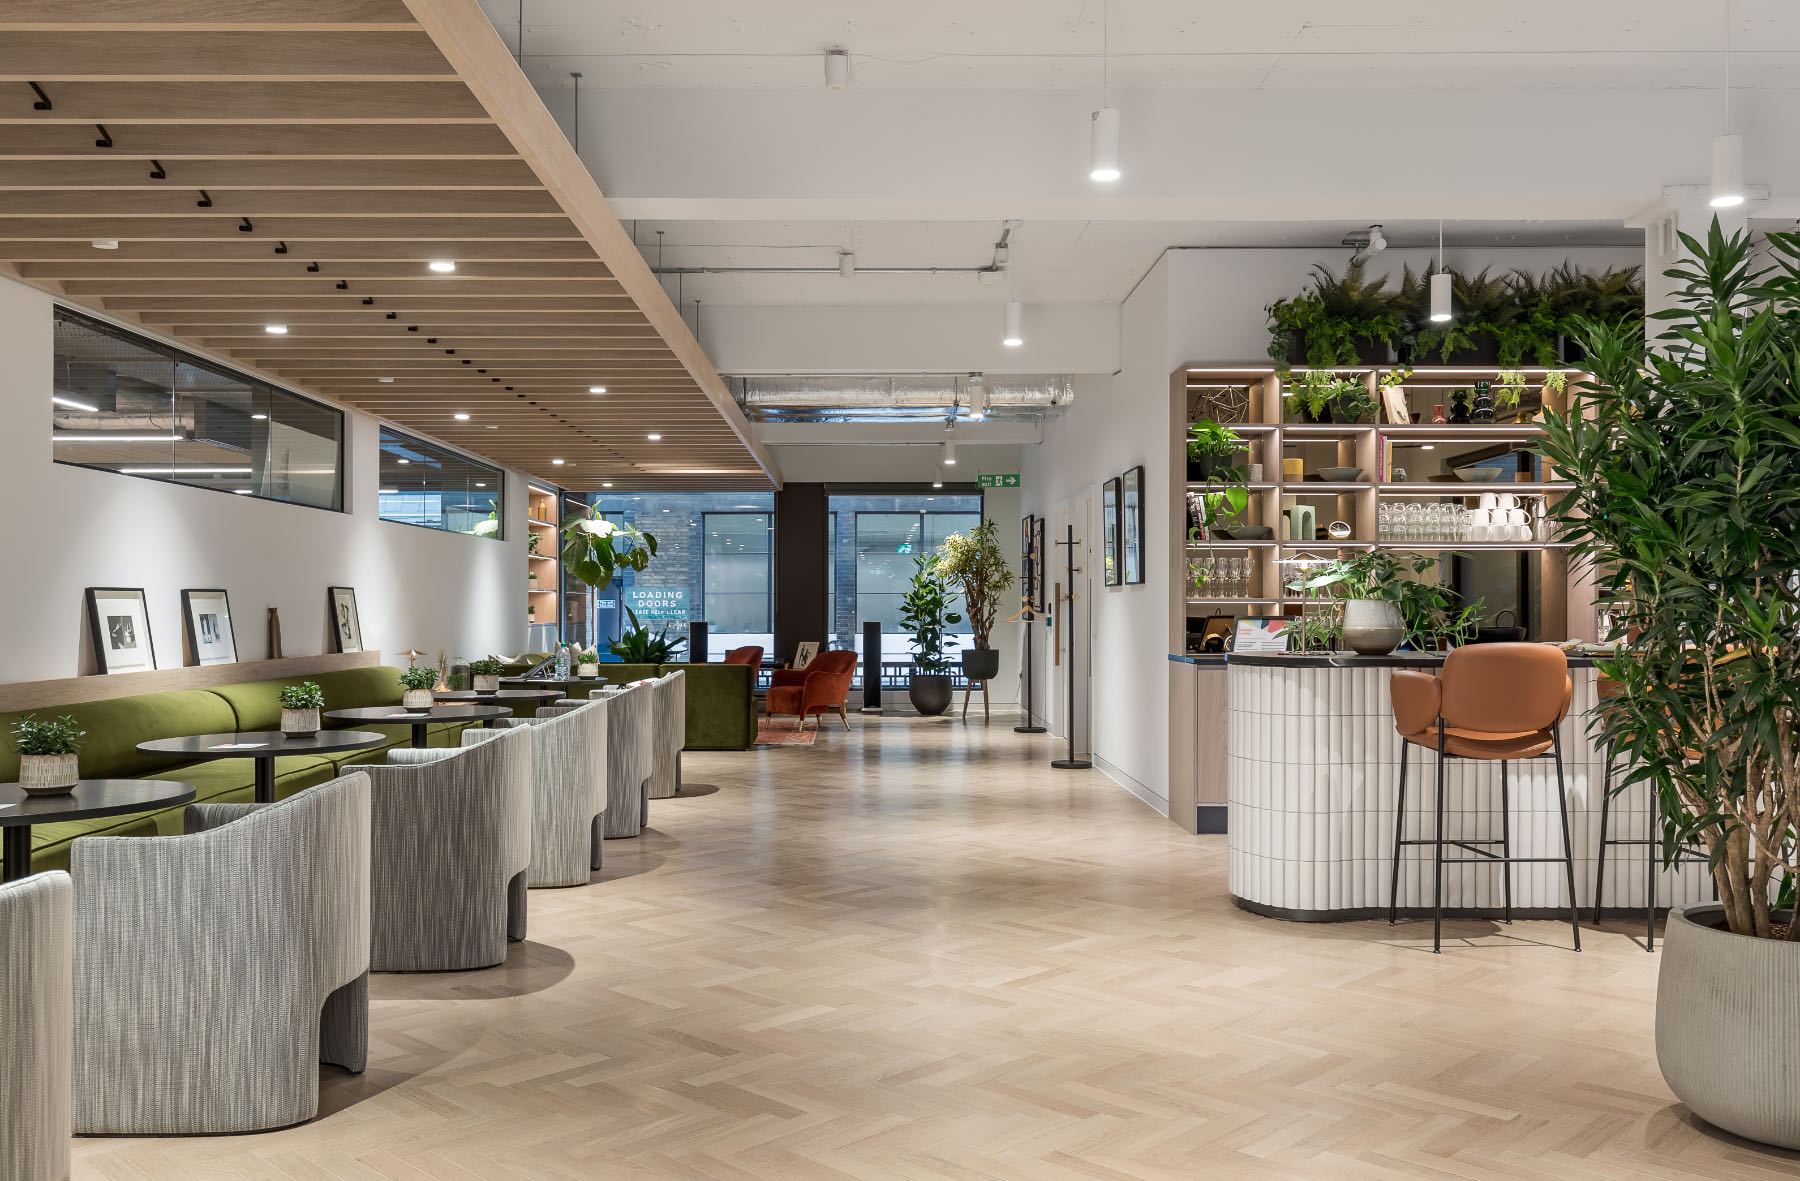 A Look Inside Fora’s New London Coworking Space